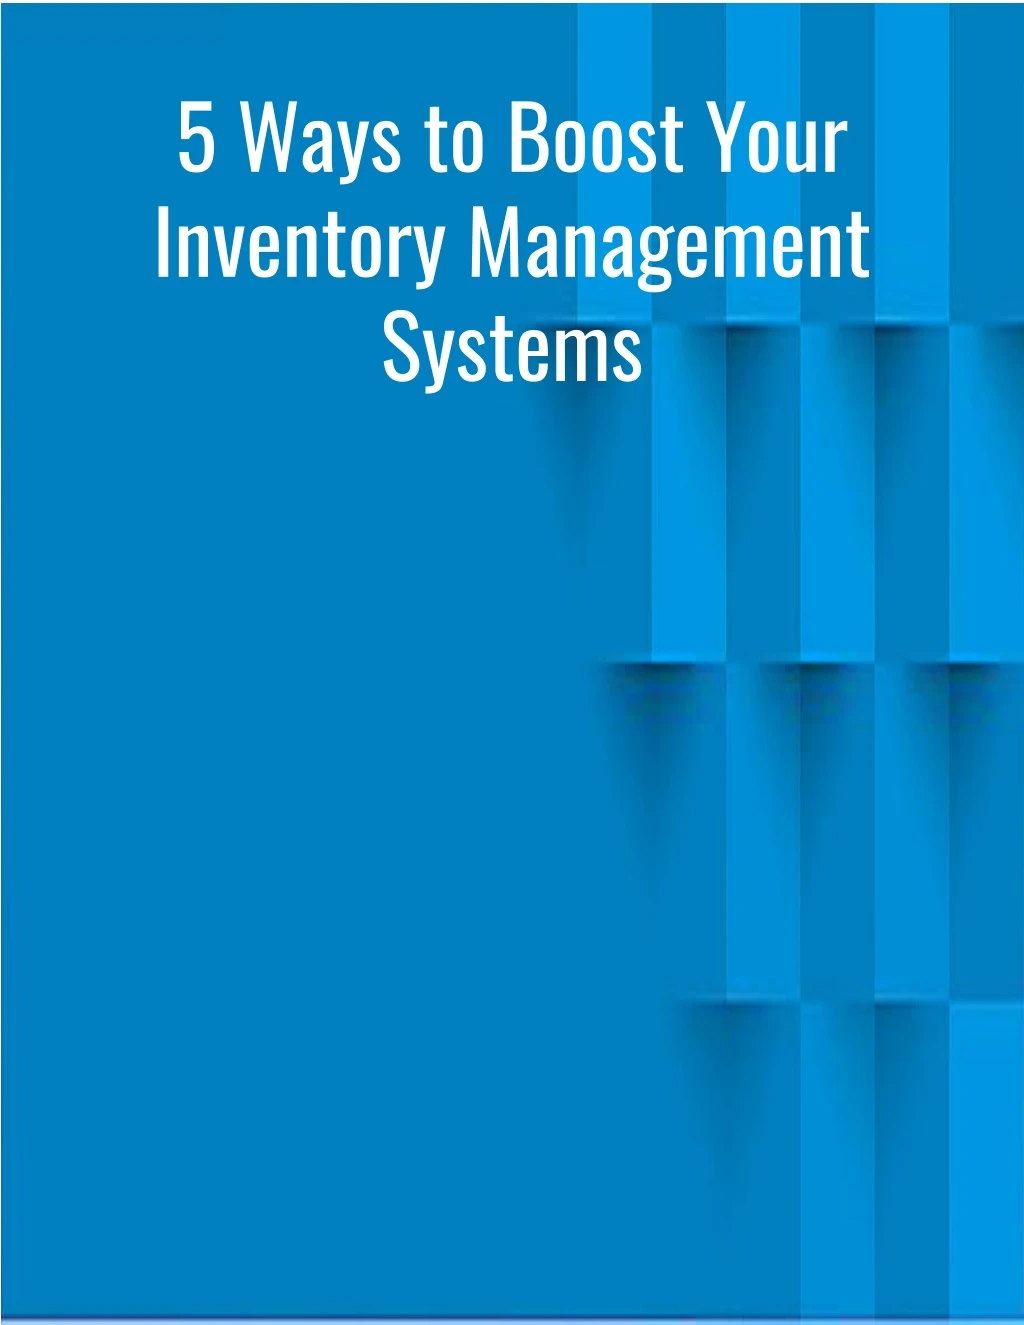 5 ways to boost your inventory management systems